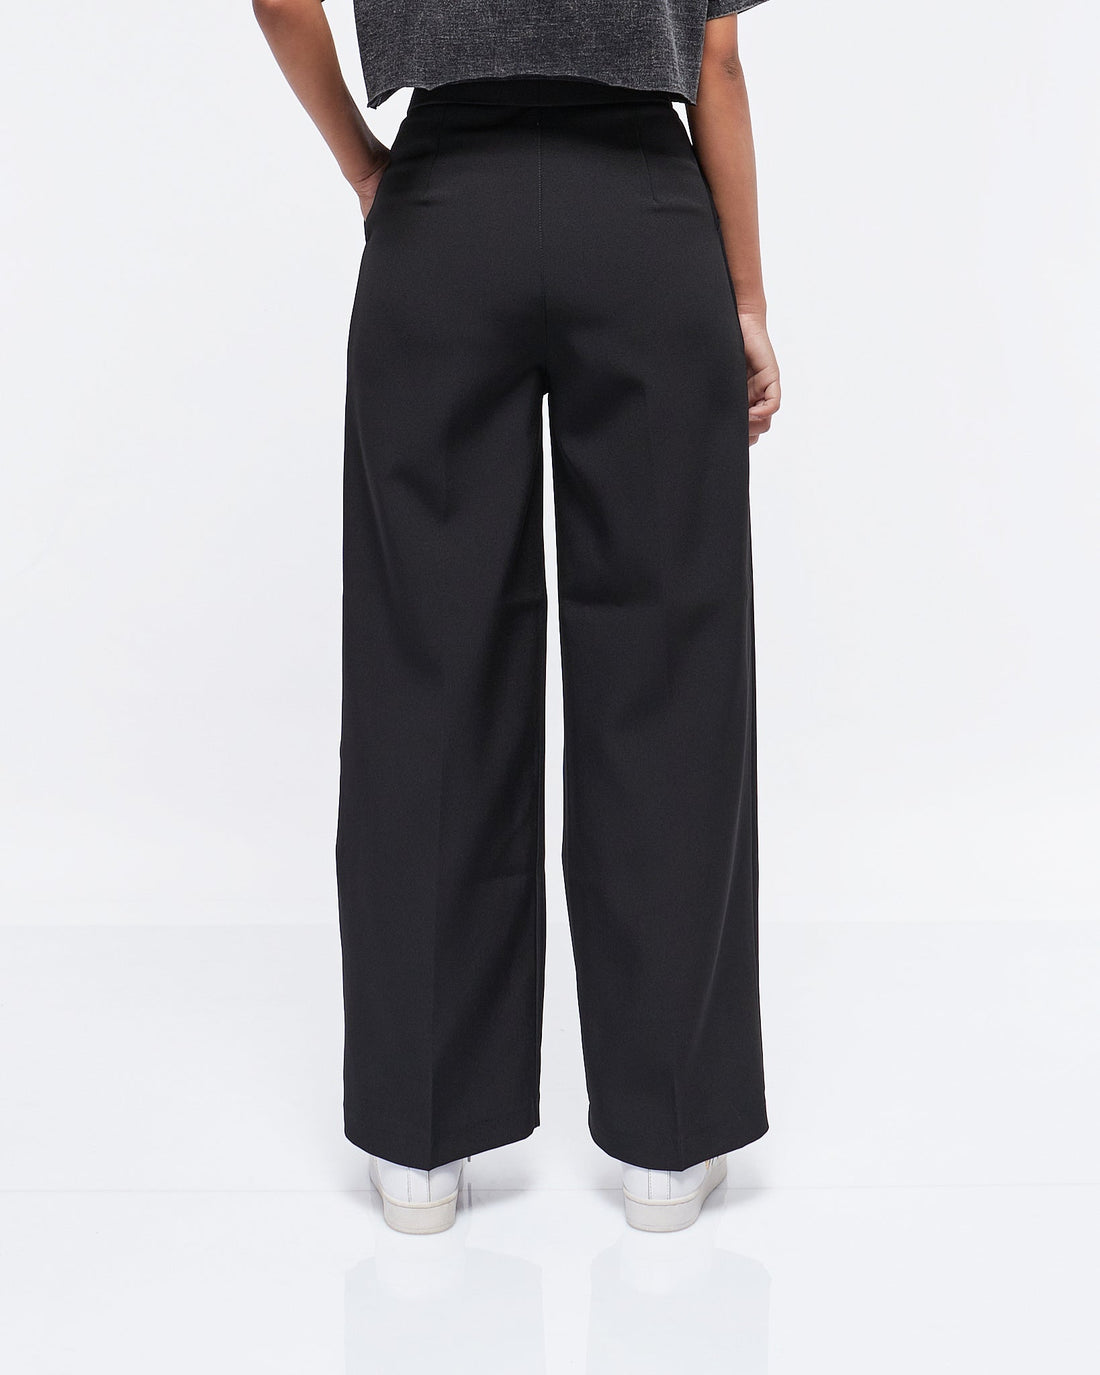 MOI OUTFIT-Casual Lady Wide Leg Pants 22.90